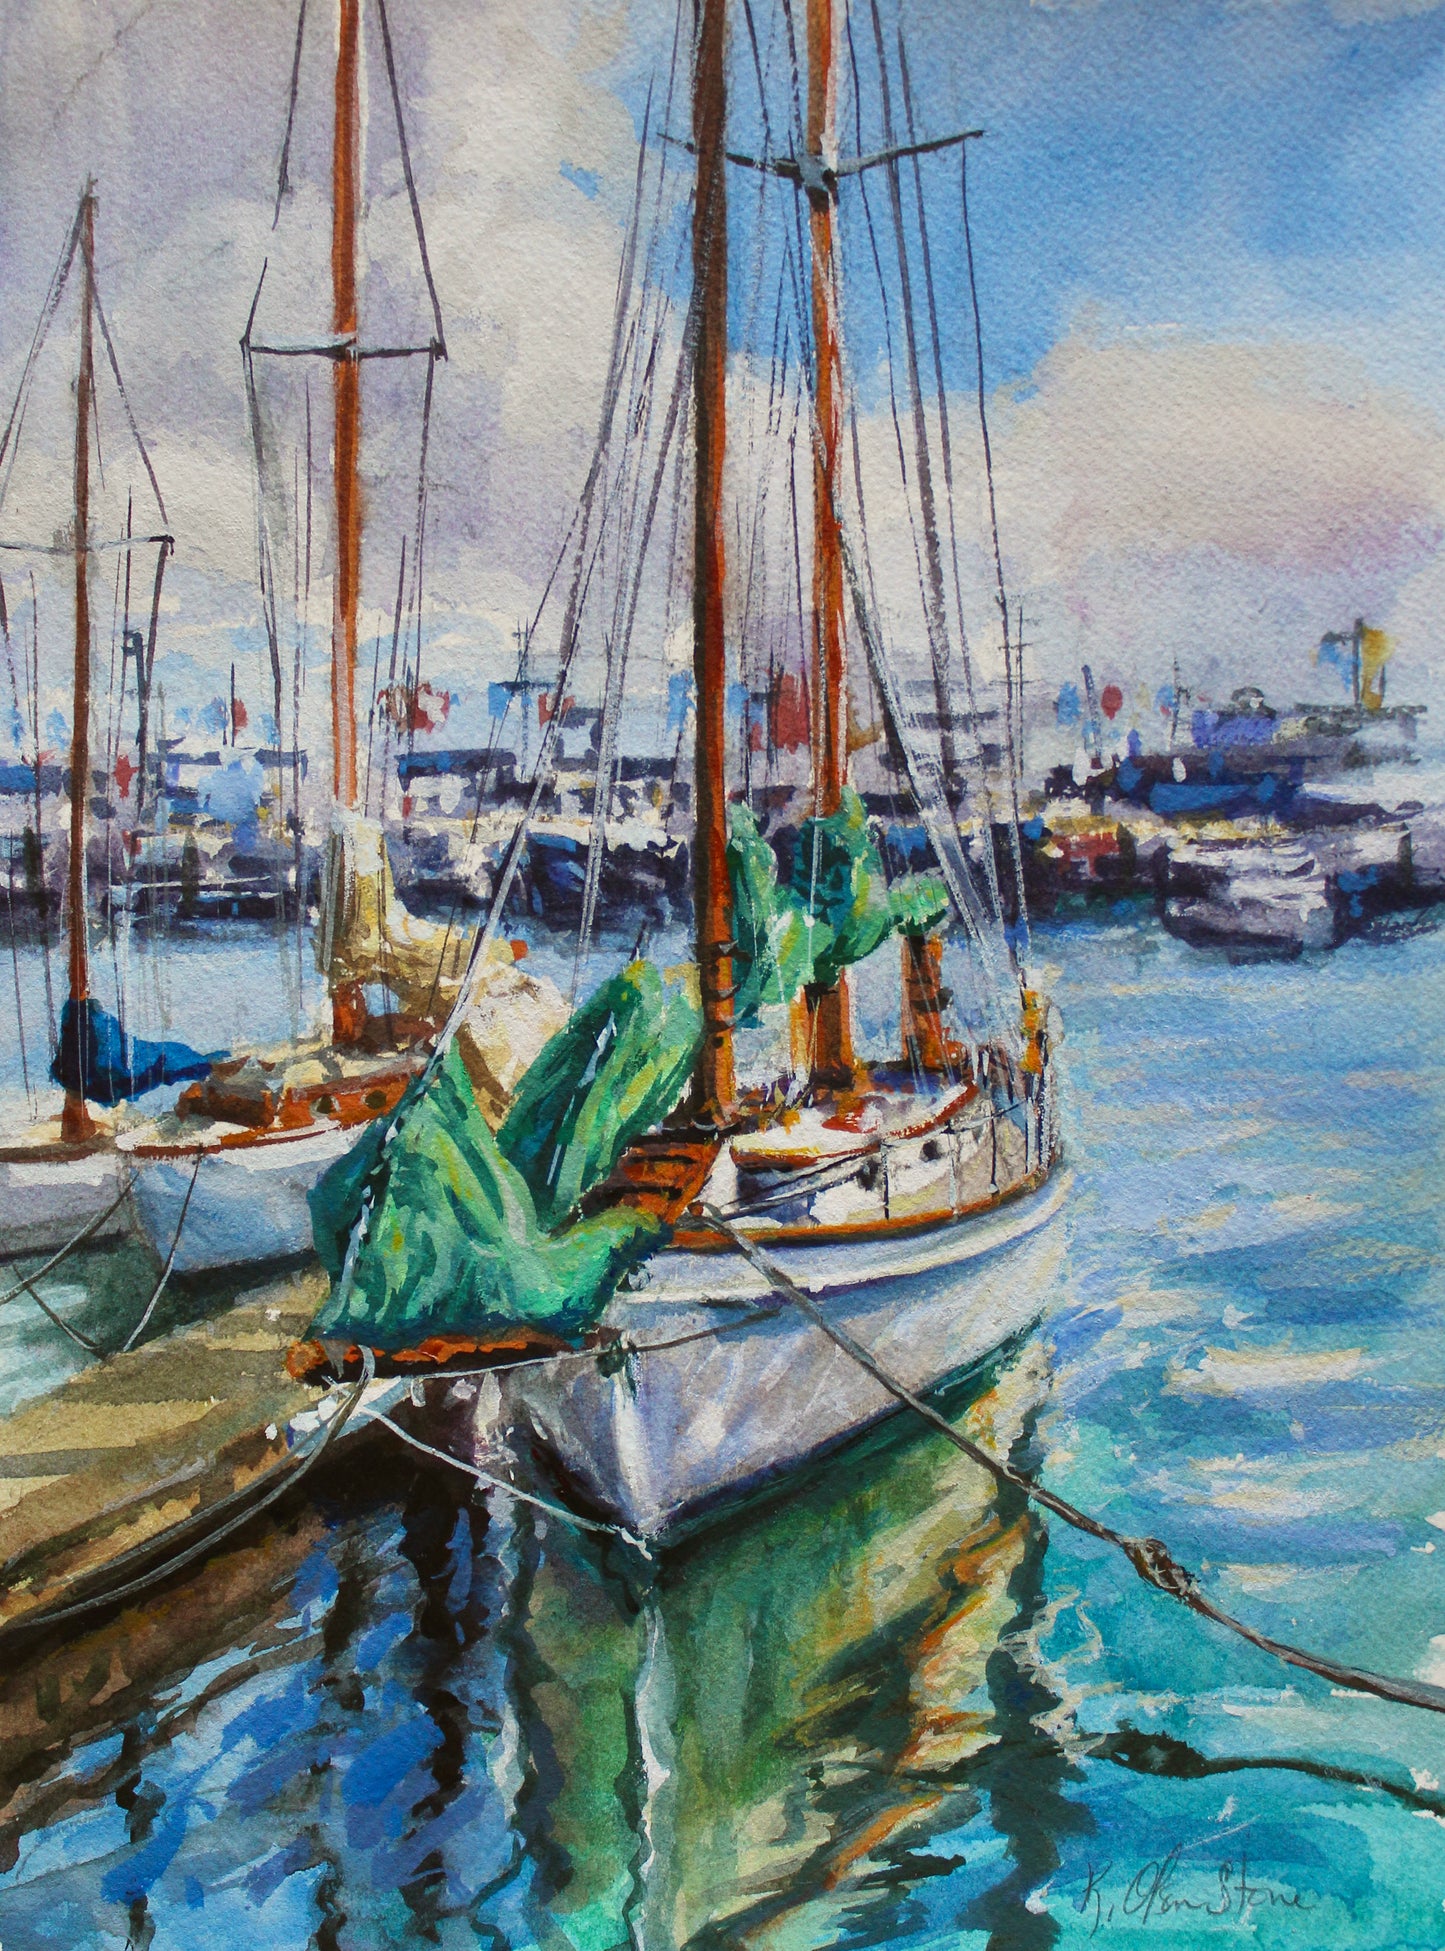 Arcturus, An Original 12" x 9" Watercolor Painting Of A Sailboat At Viaduct Harbour, Auckland, New Zealand